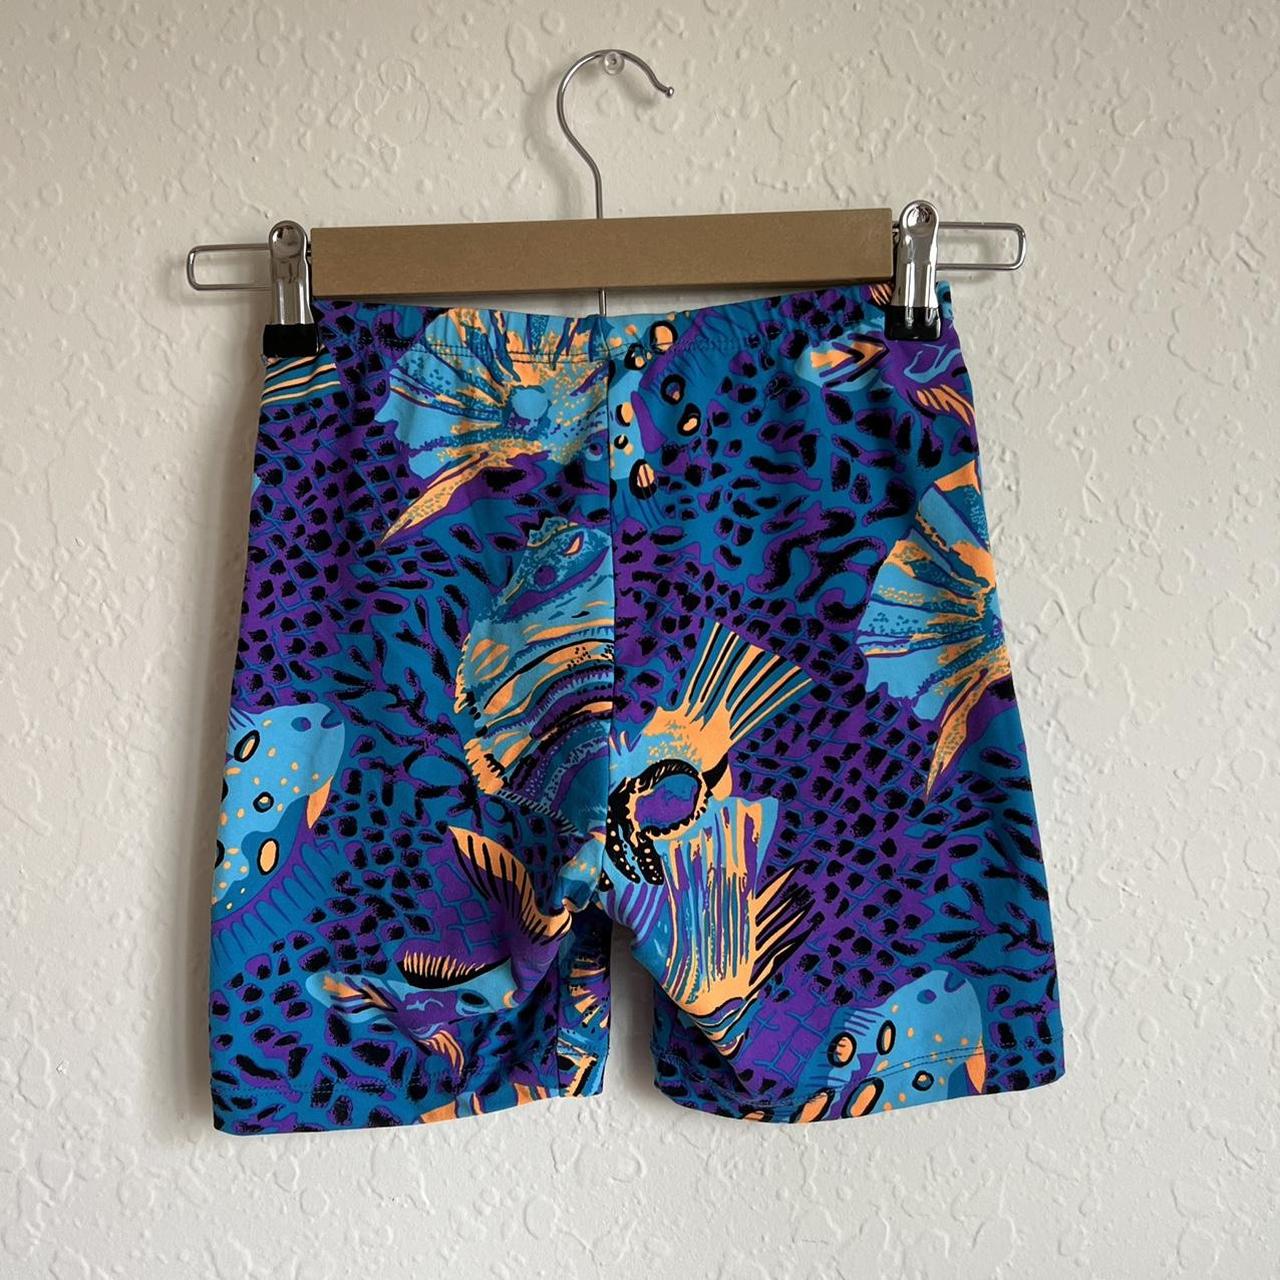 Women's Blue and Purple Shorts (4)